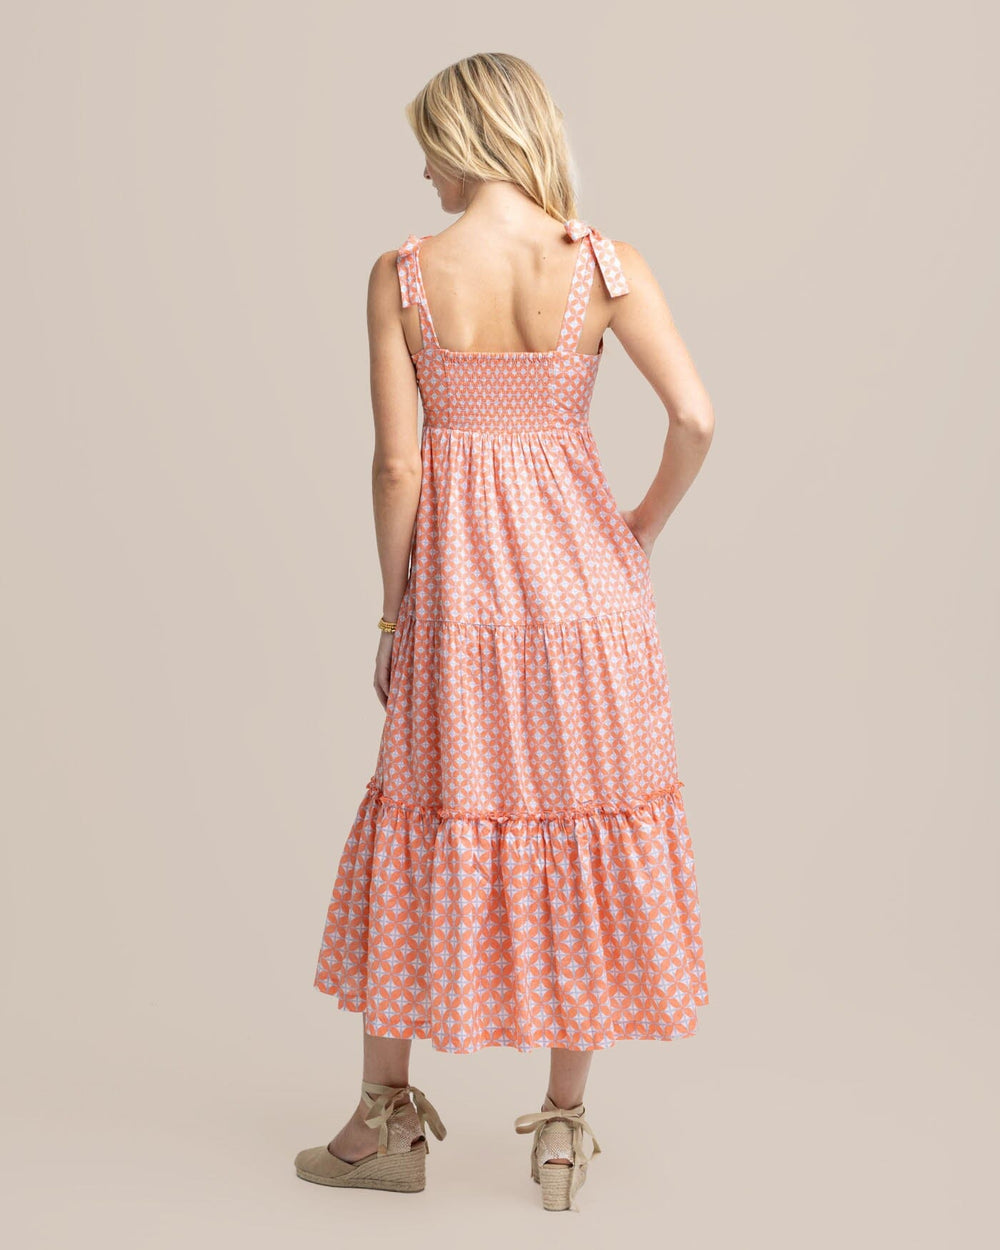 The back view of the Southern Tide Sylvi Sun Daze Geo Printed Maxi Dress by Southern Tide - Conch Shell